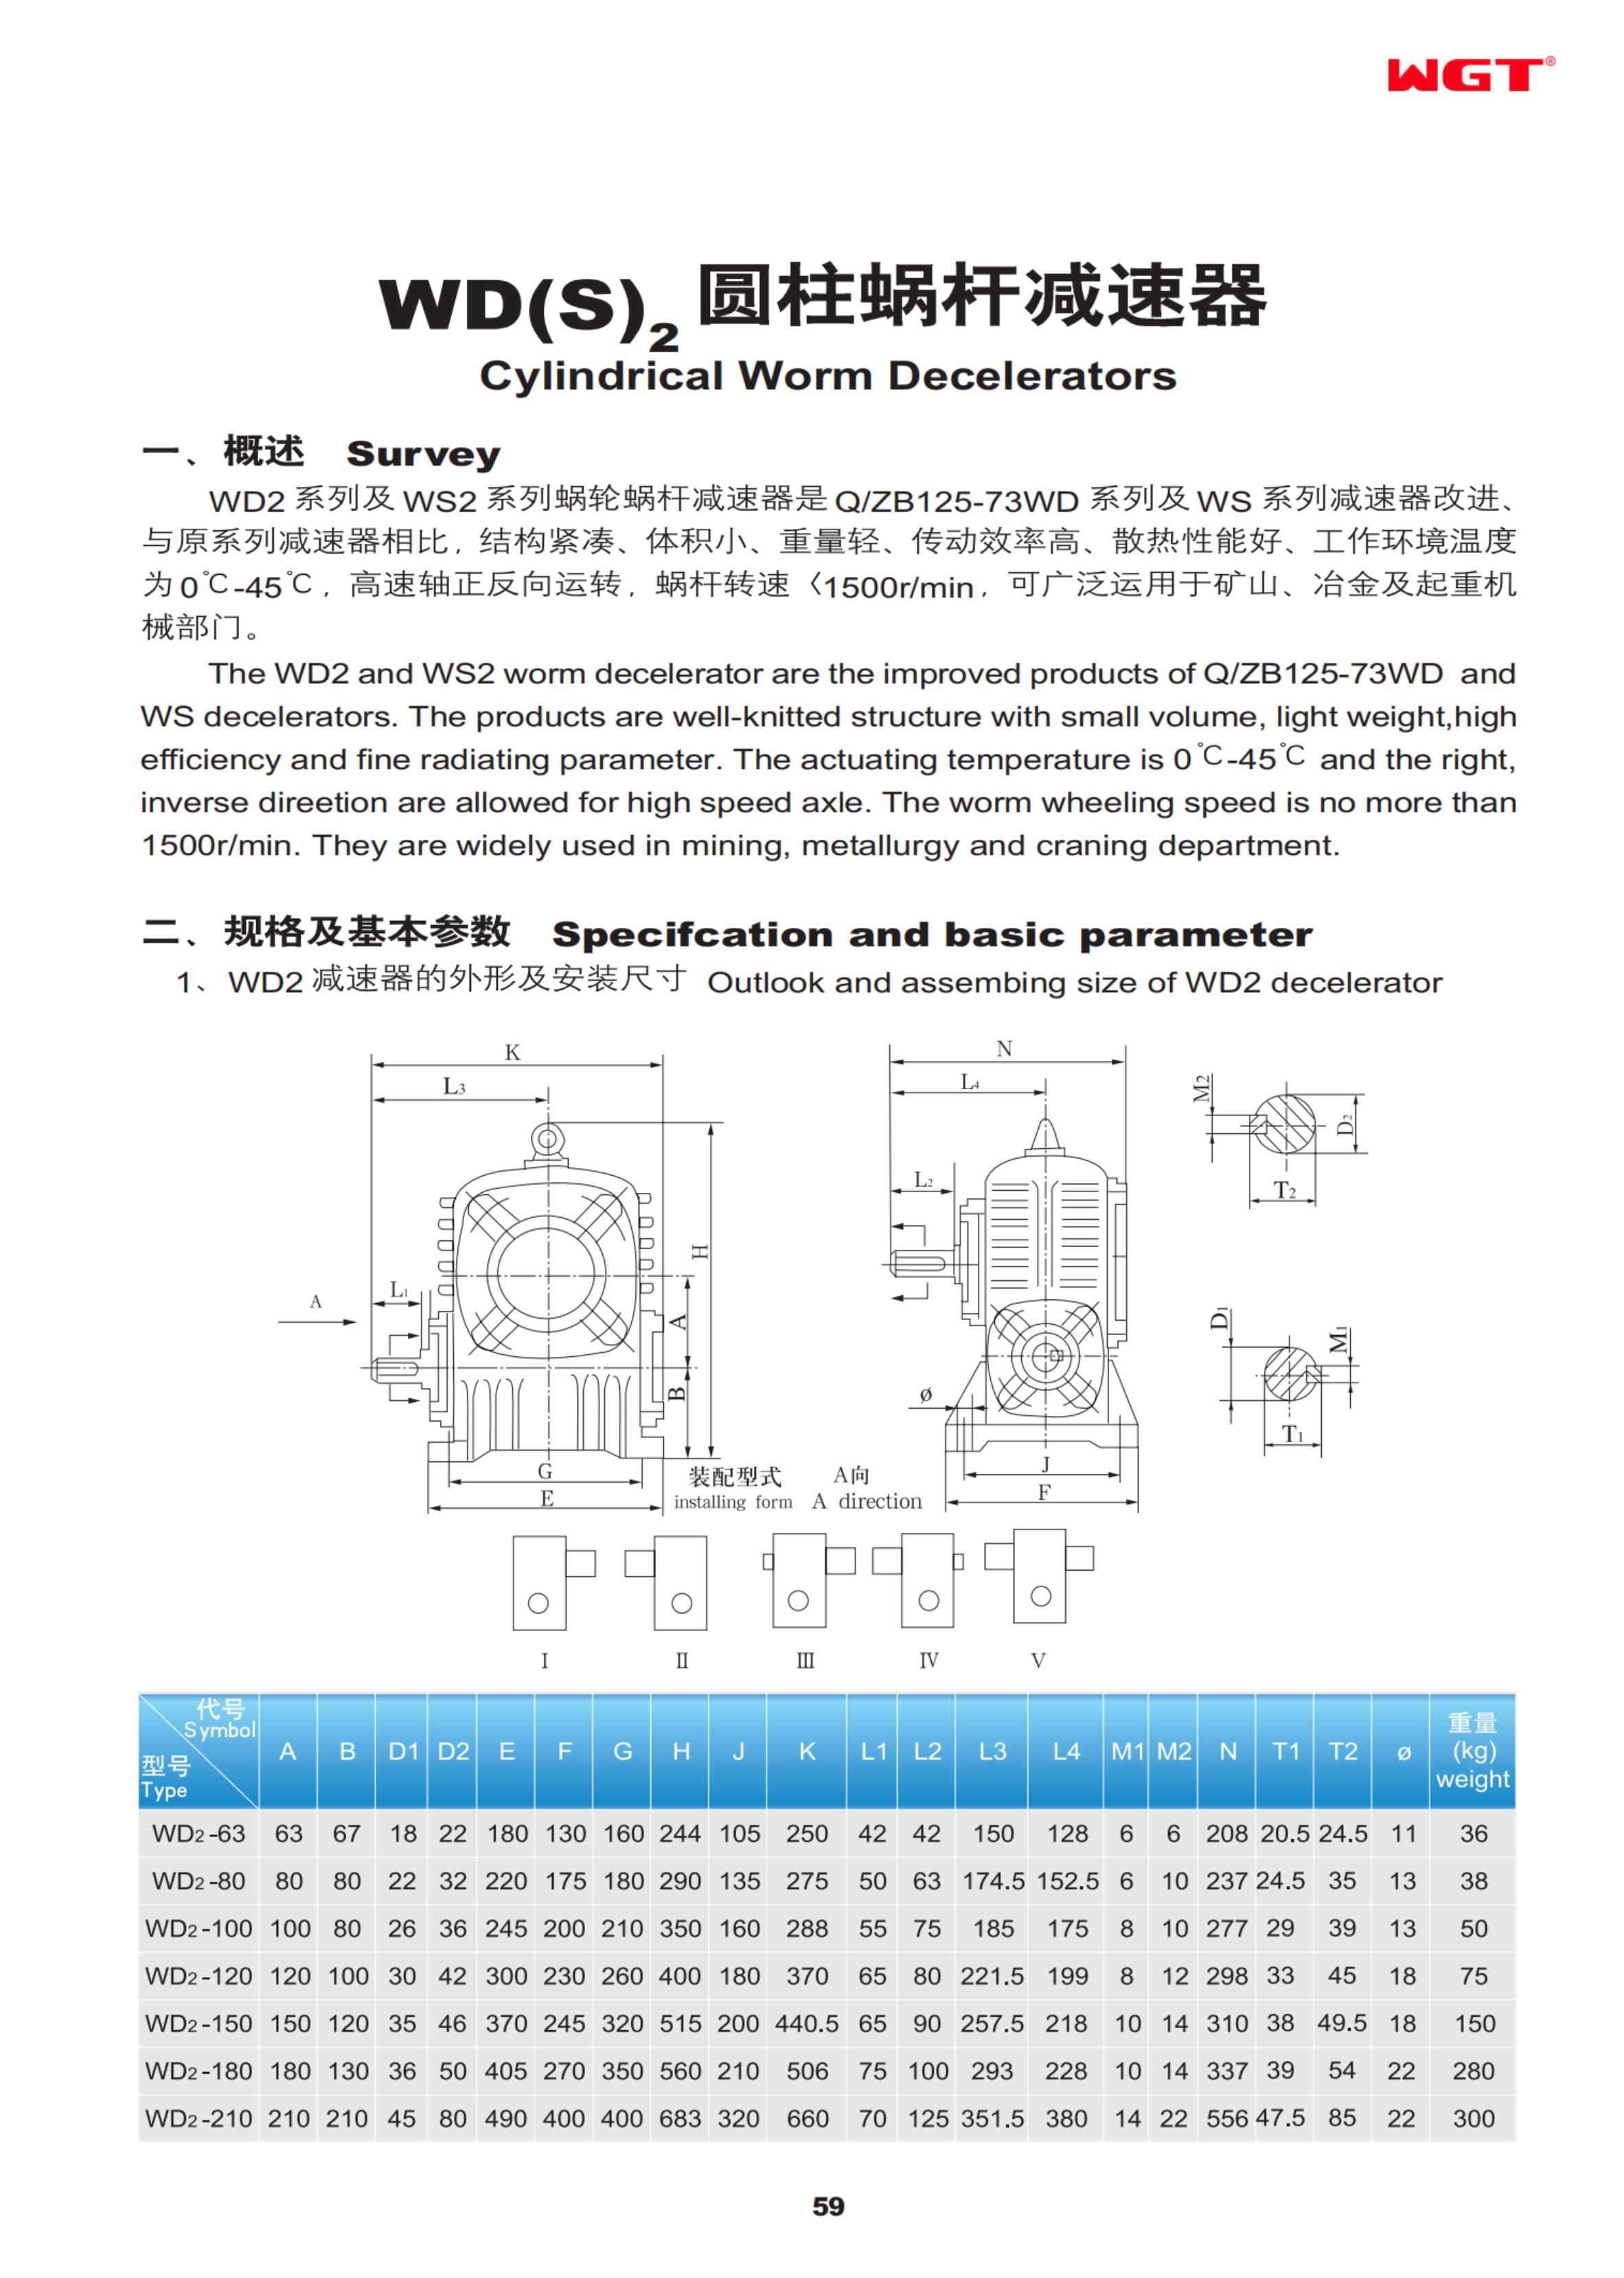 WD2-150 cylindrical worm reducer WGT